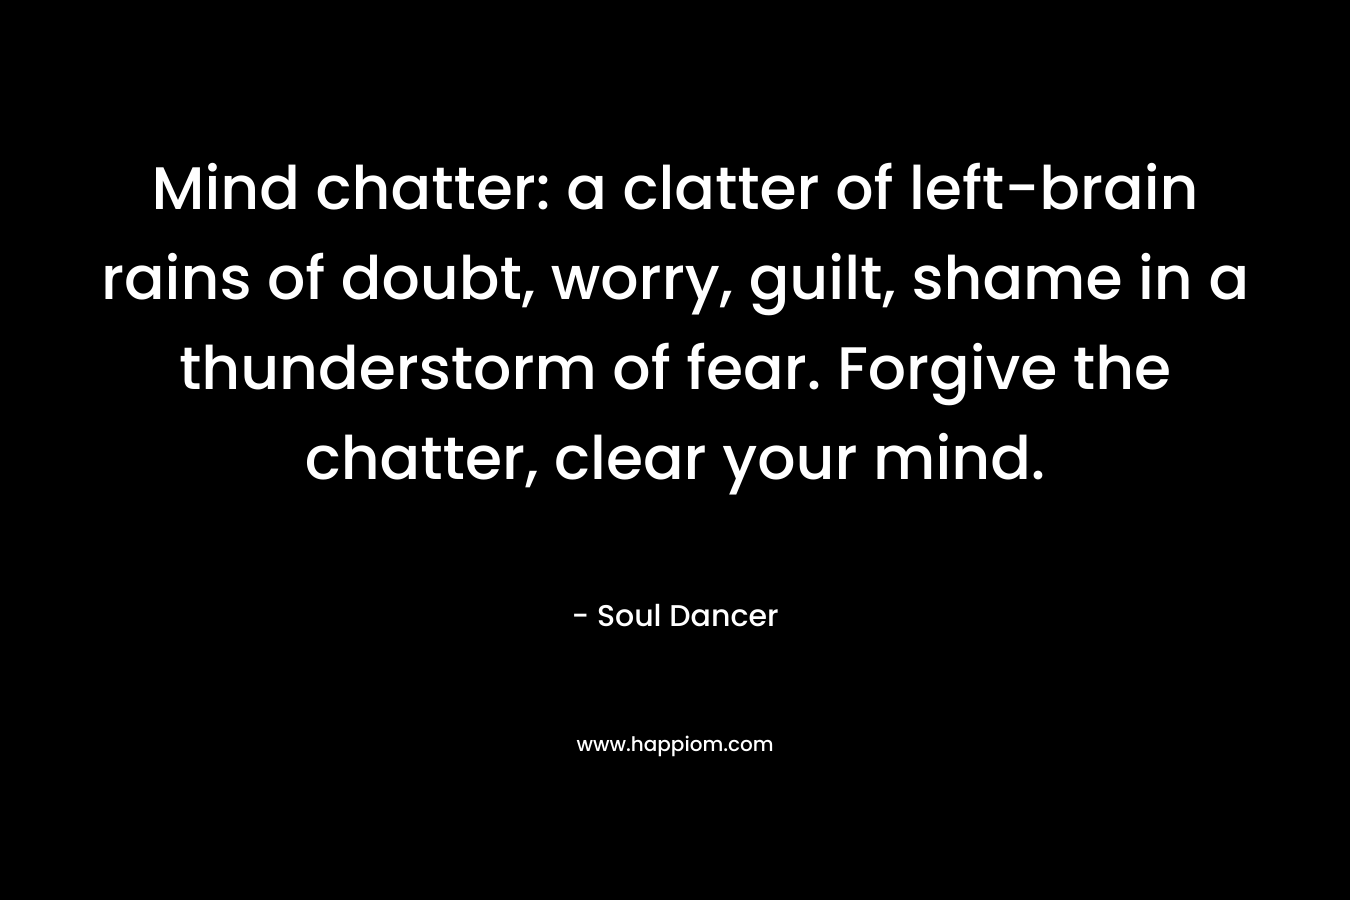 Mind chatter: a clatter of left-brain rains of doubt, worry, guilt, shame in a thunderstorm of fear. Forgive the chatter, clear your mind. – Soul Dancer